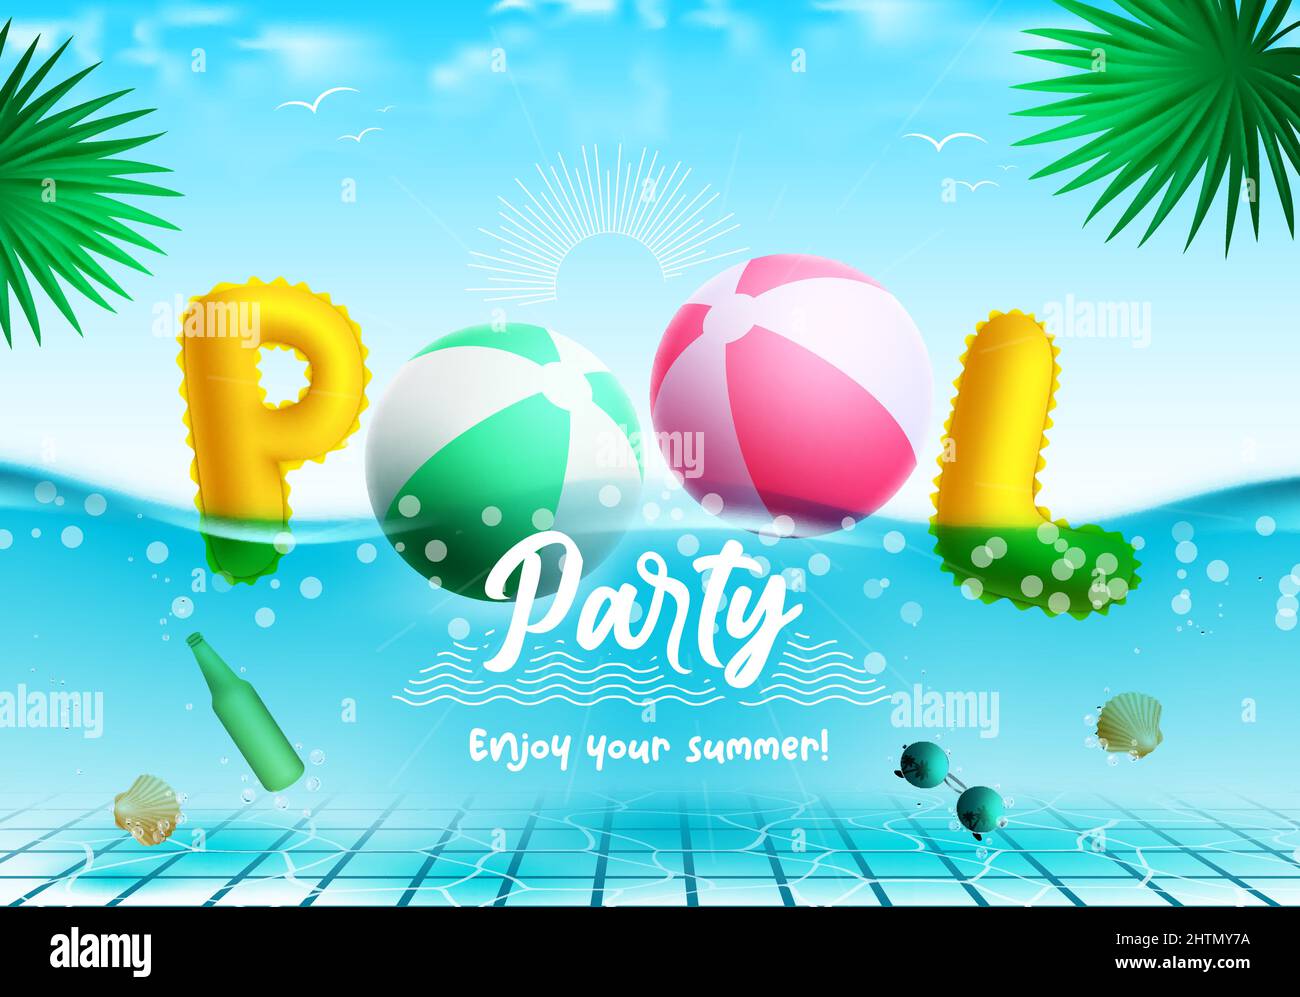 Summer party vector concept design. Pool party typography creative text with floating beach ball and inflatable letters in front view underwater. Stock Vector